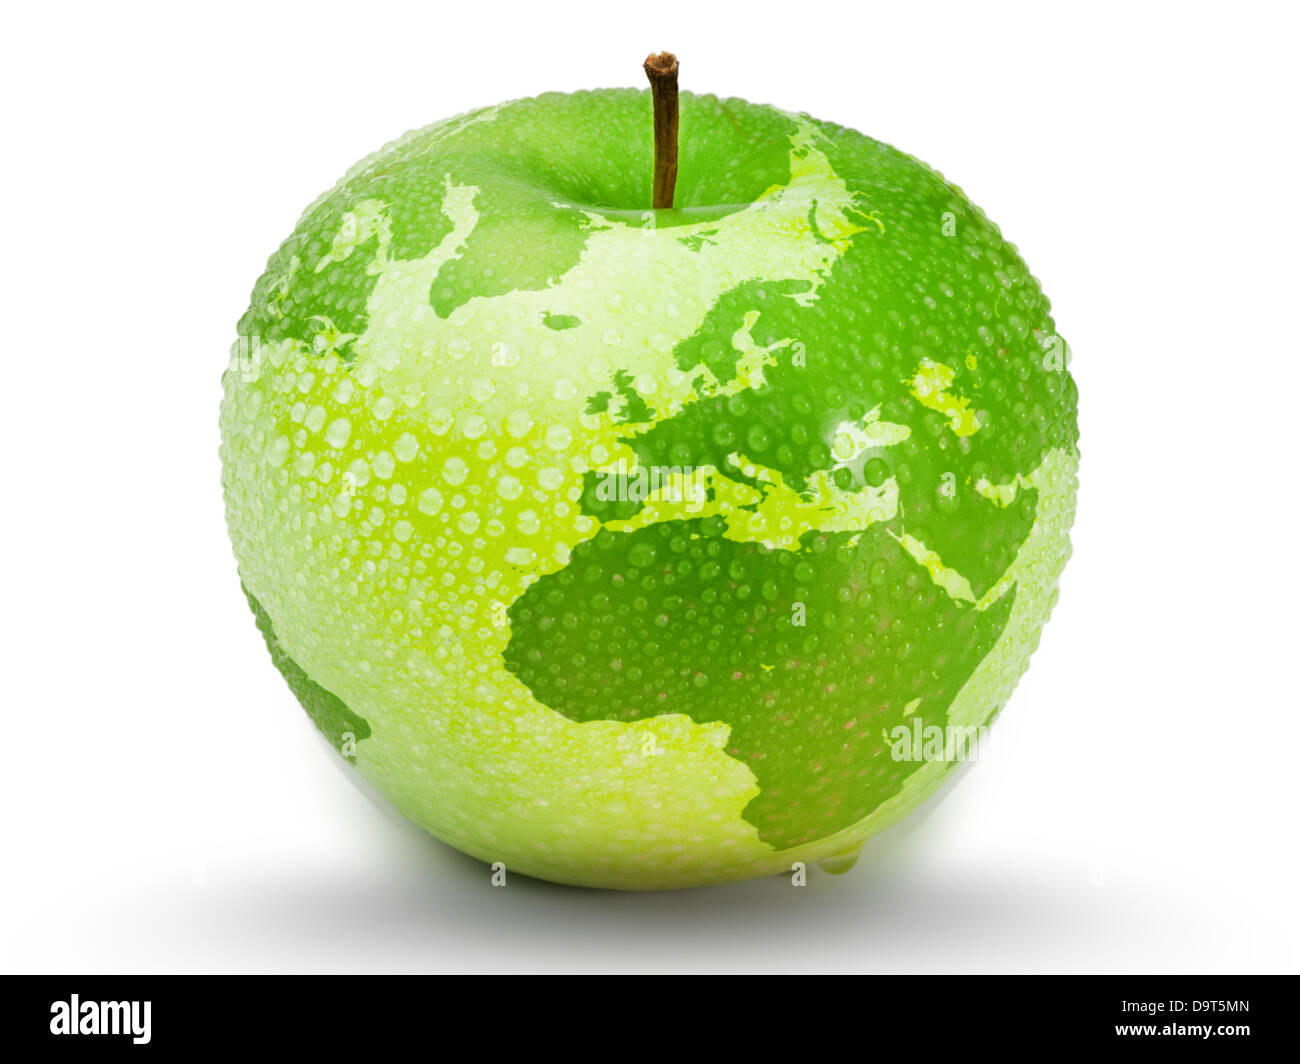 Green apple representing earth with drops on it Stock Photo